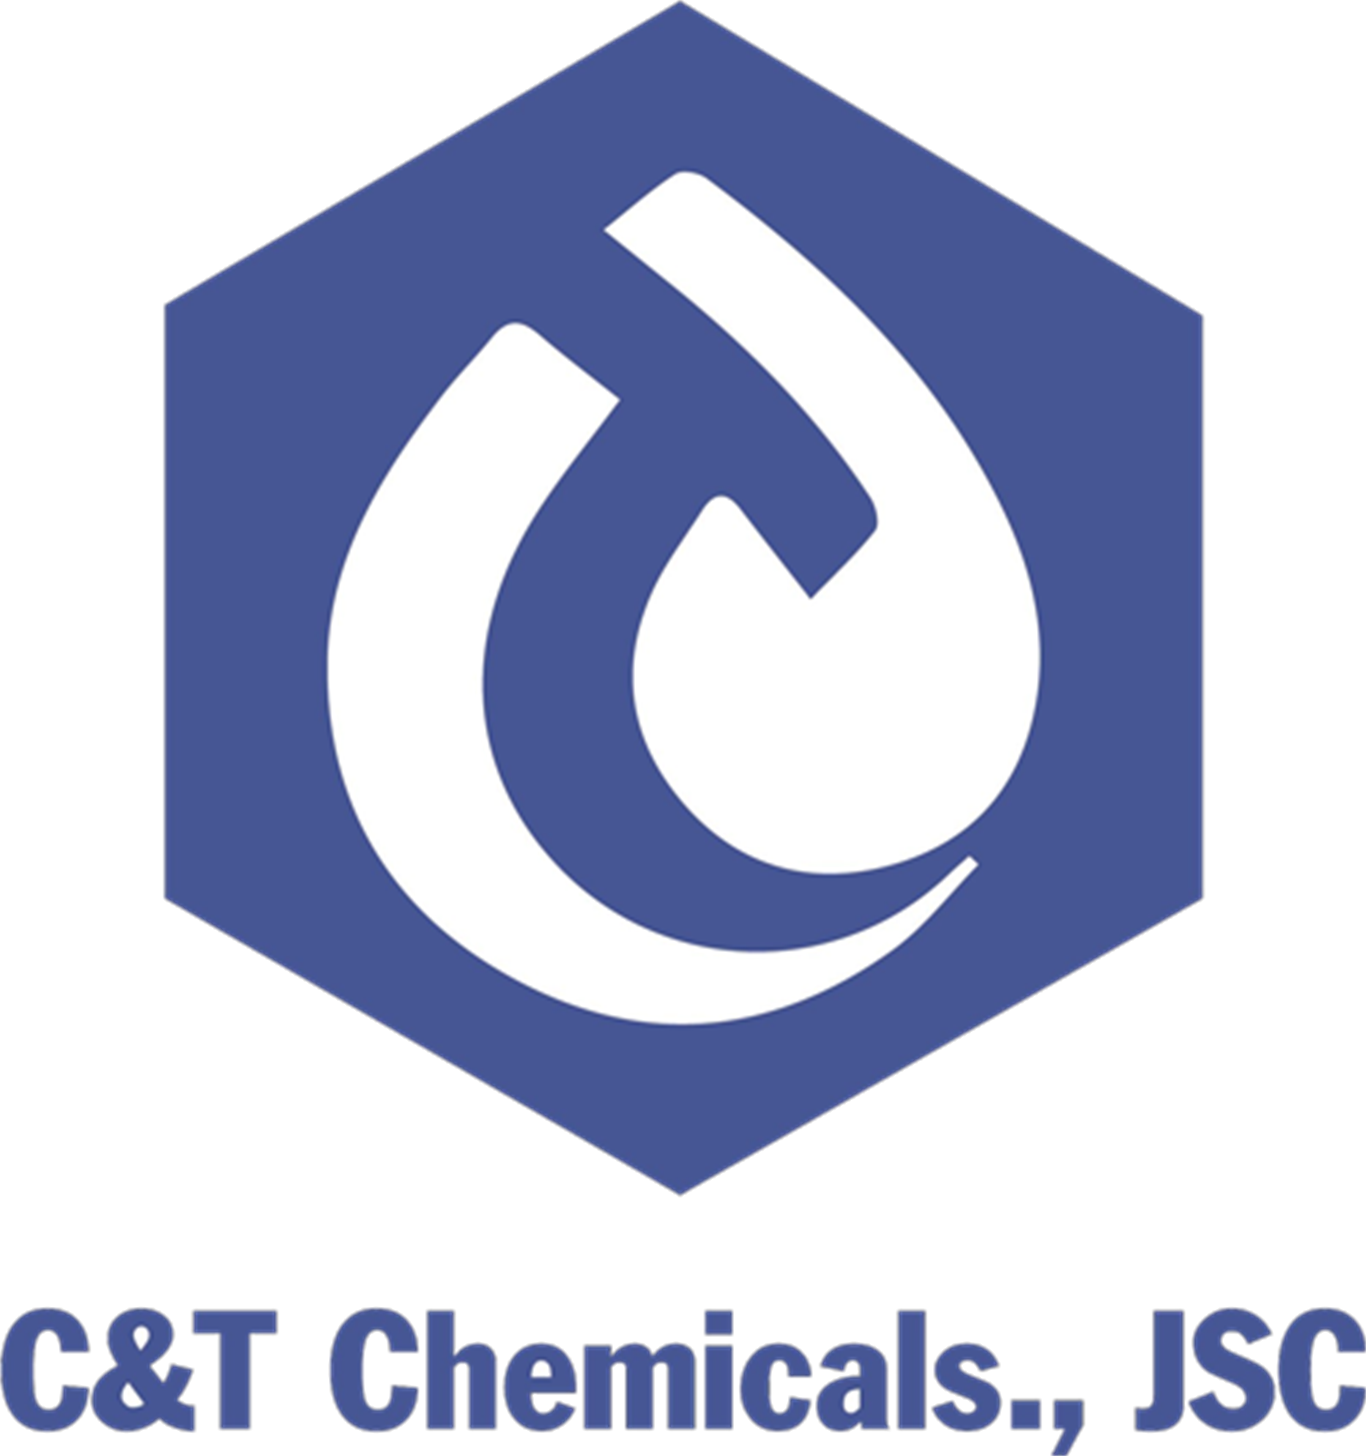 C&T CHEMICAL JOINT STOCK COMPANY